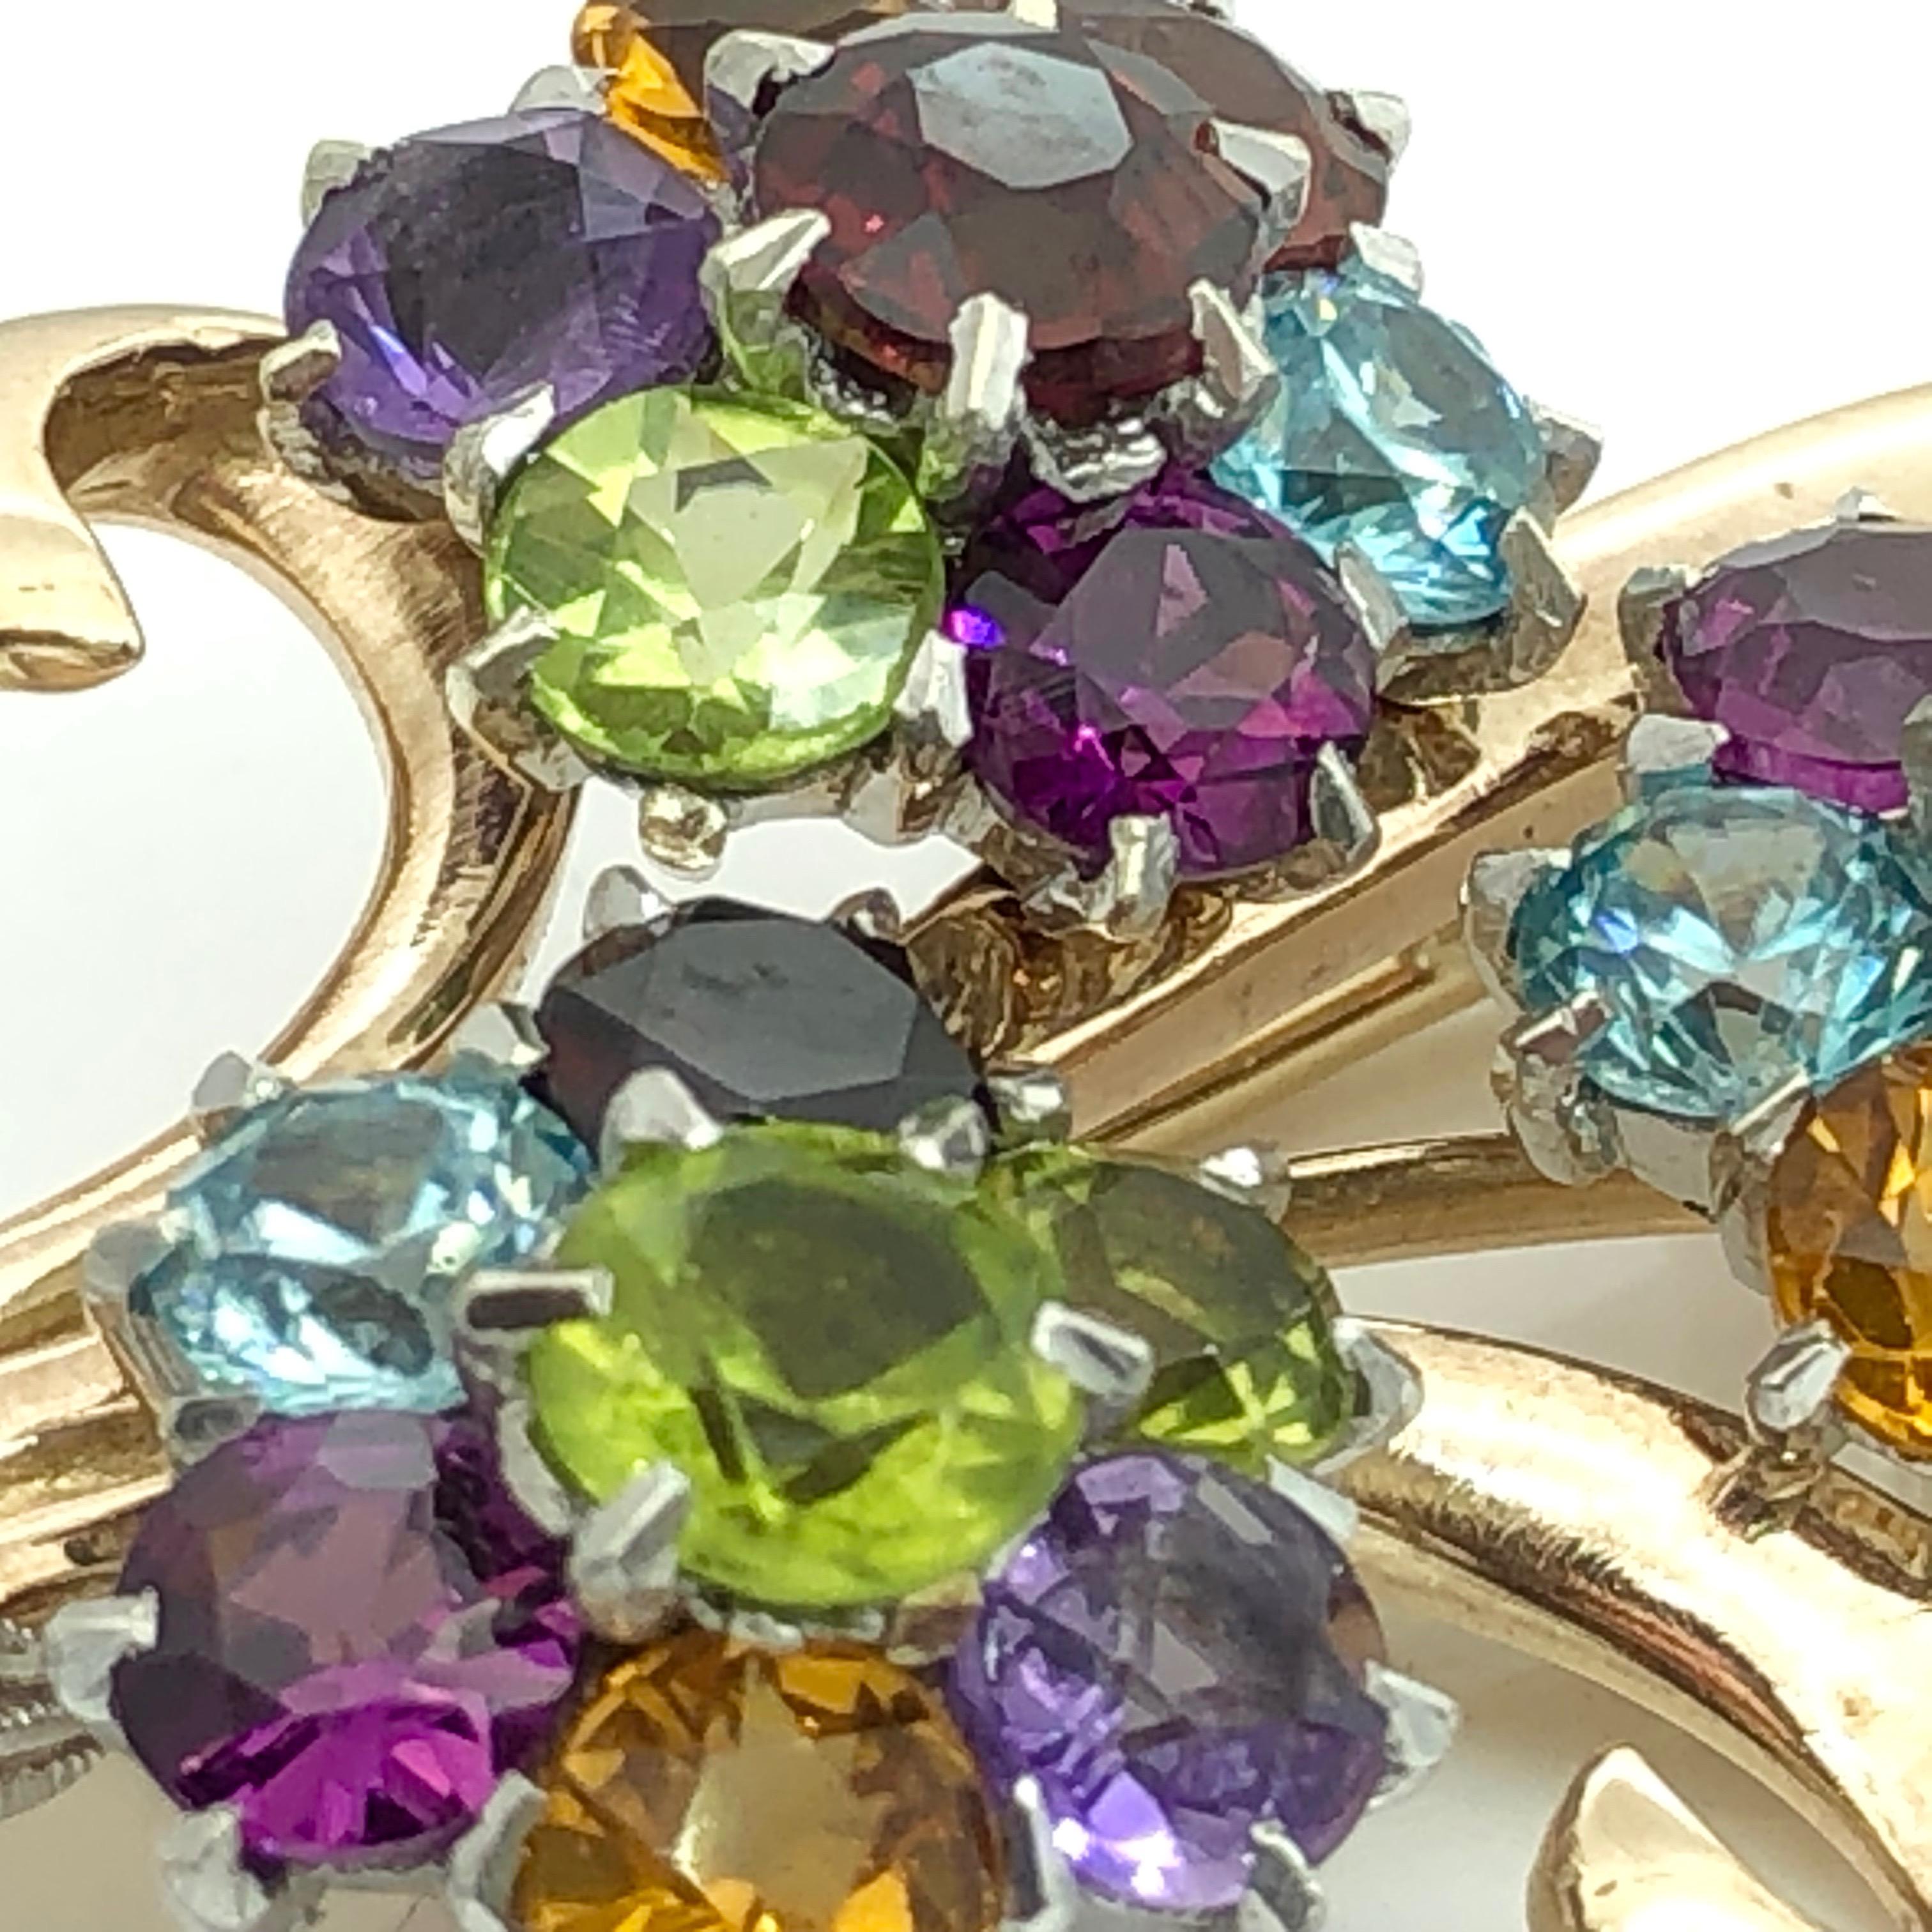 Large luxurious flower bouquet pin brooch
Set in 9 carat yellow gold, stamped 375 and inscribed DJE
Twenty one multicoloured semi-precious stones - Peridots, Aquamarines, Citrines, Garnets, Amethysts
Ribbon in white gold set with rose cut